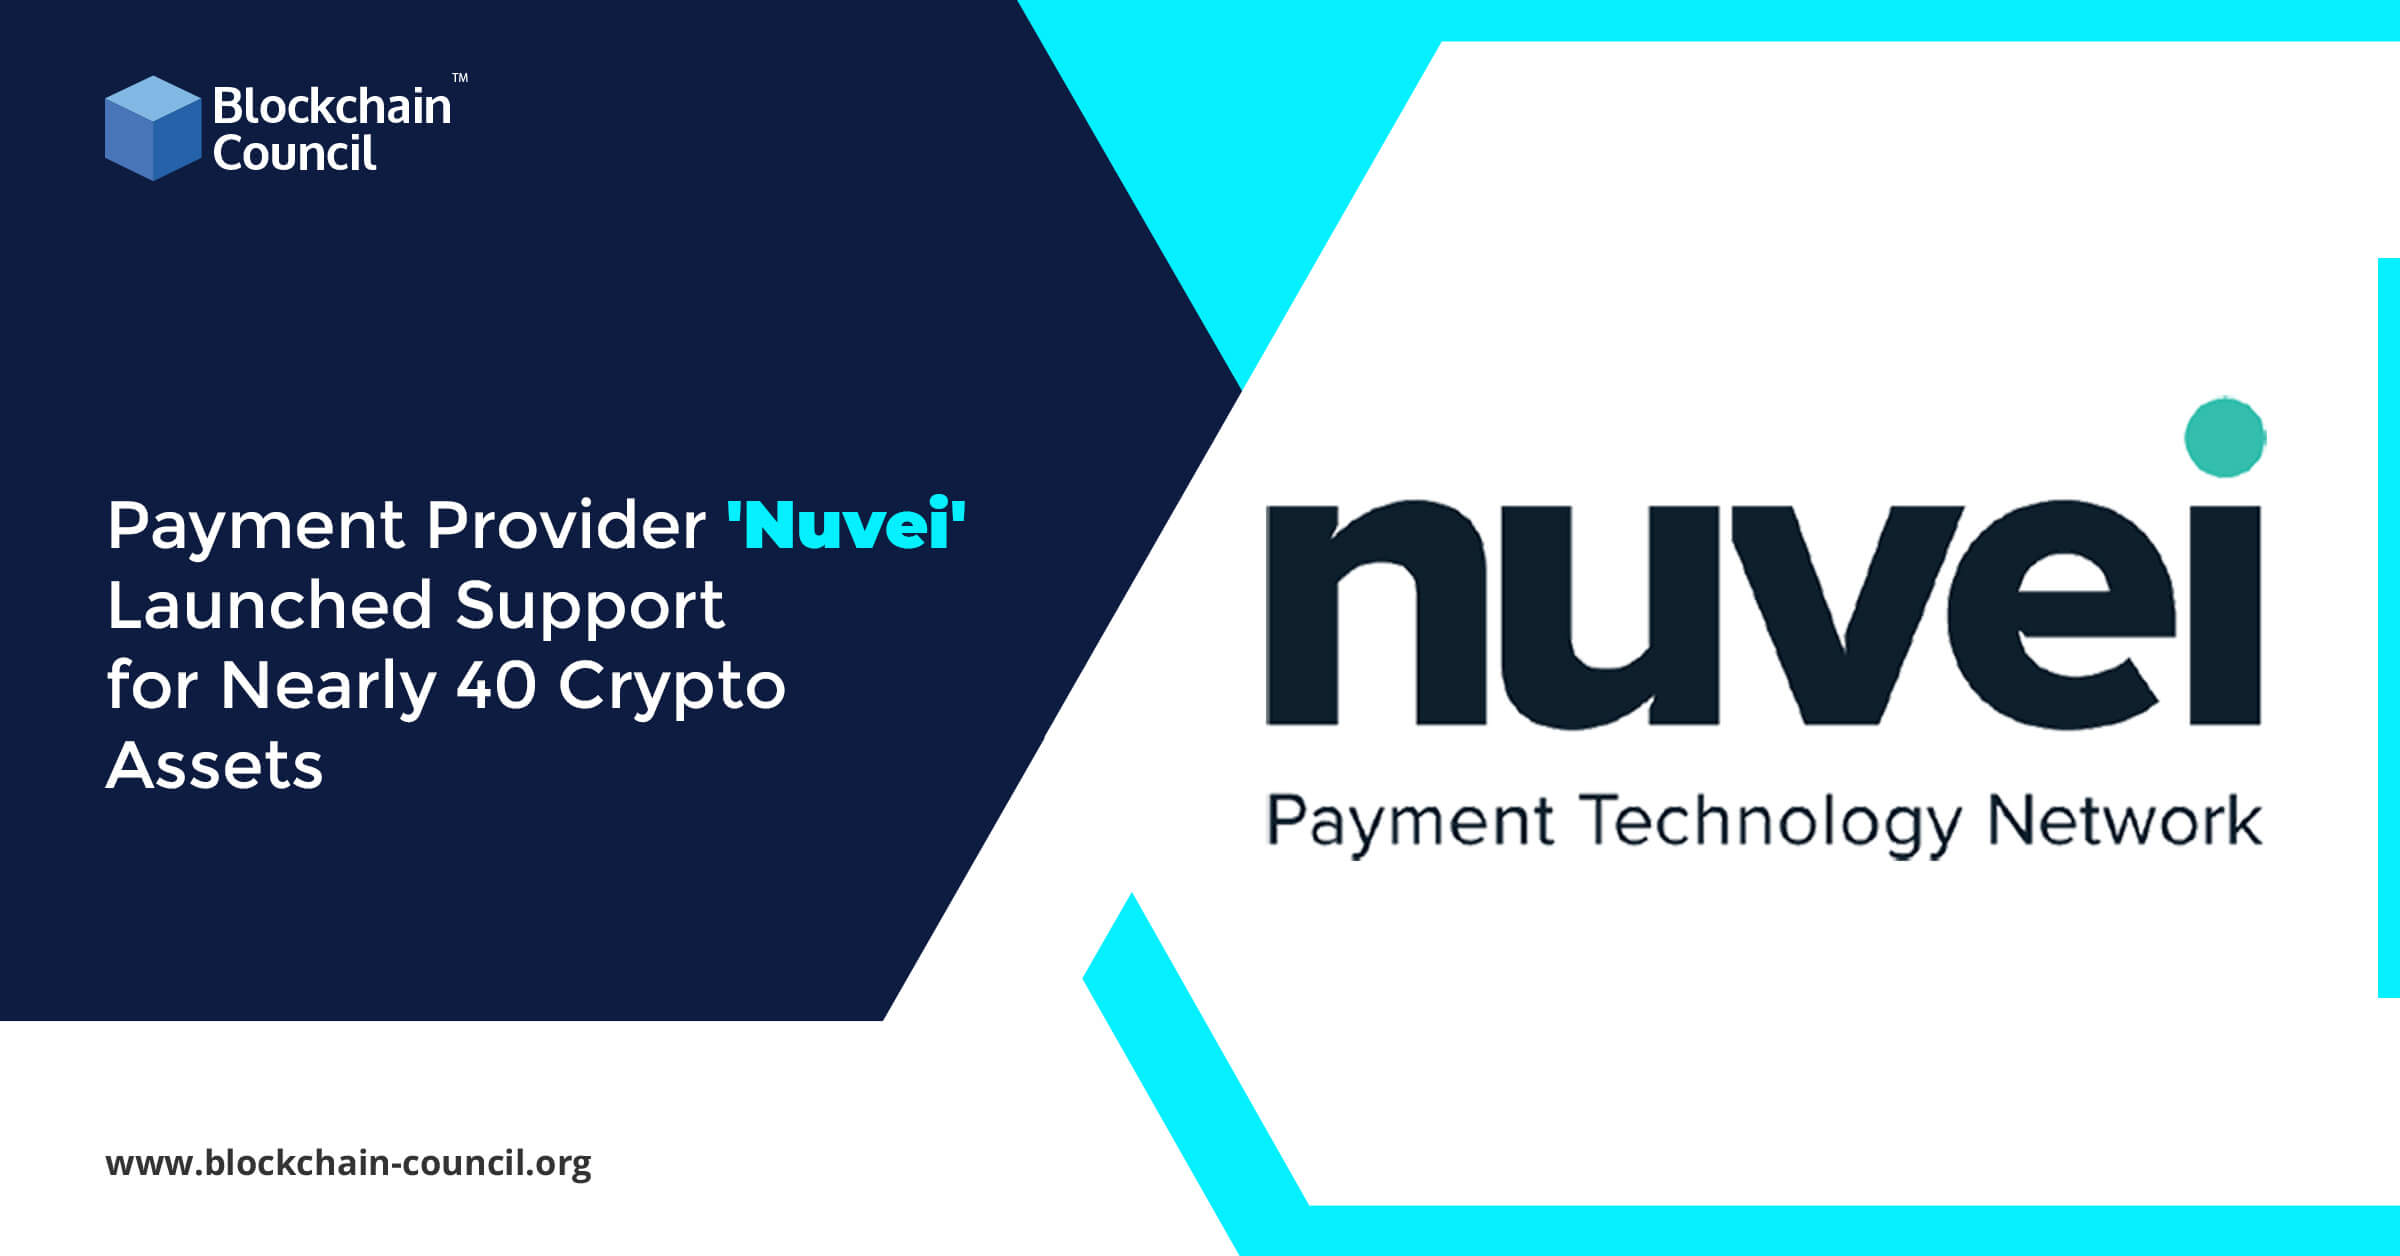 Payment Provider 'Nuvei' Launched Support for Nearly 40 Crypto Assets